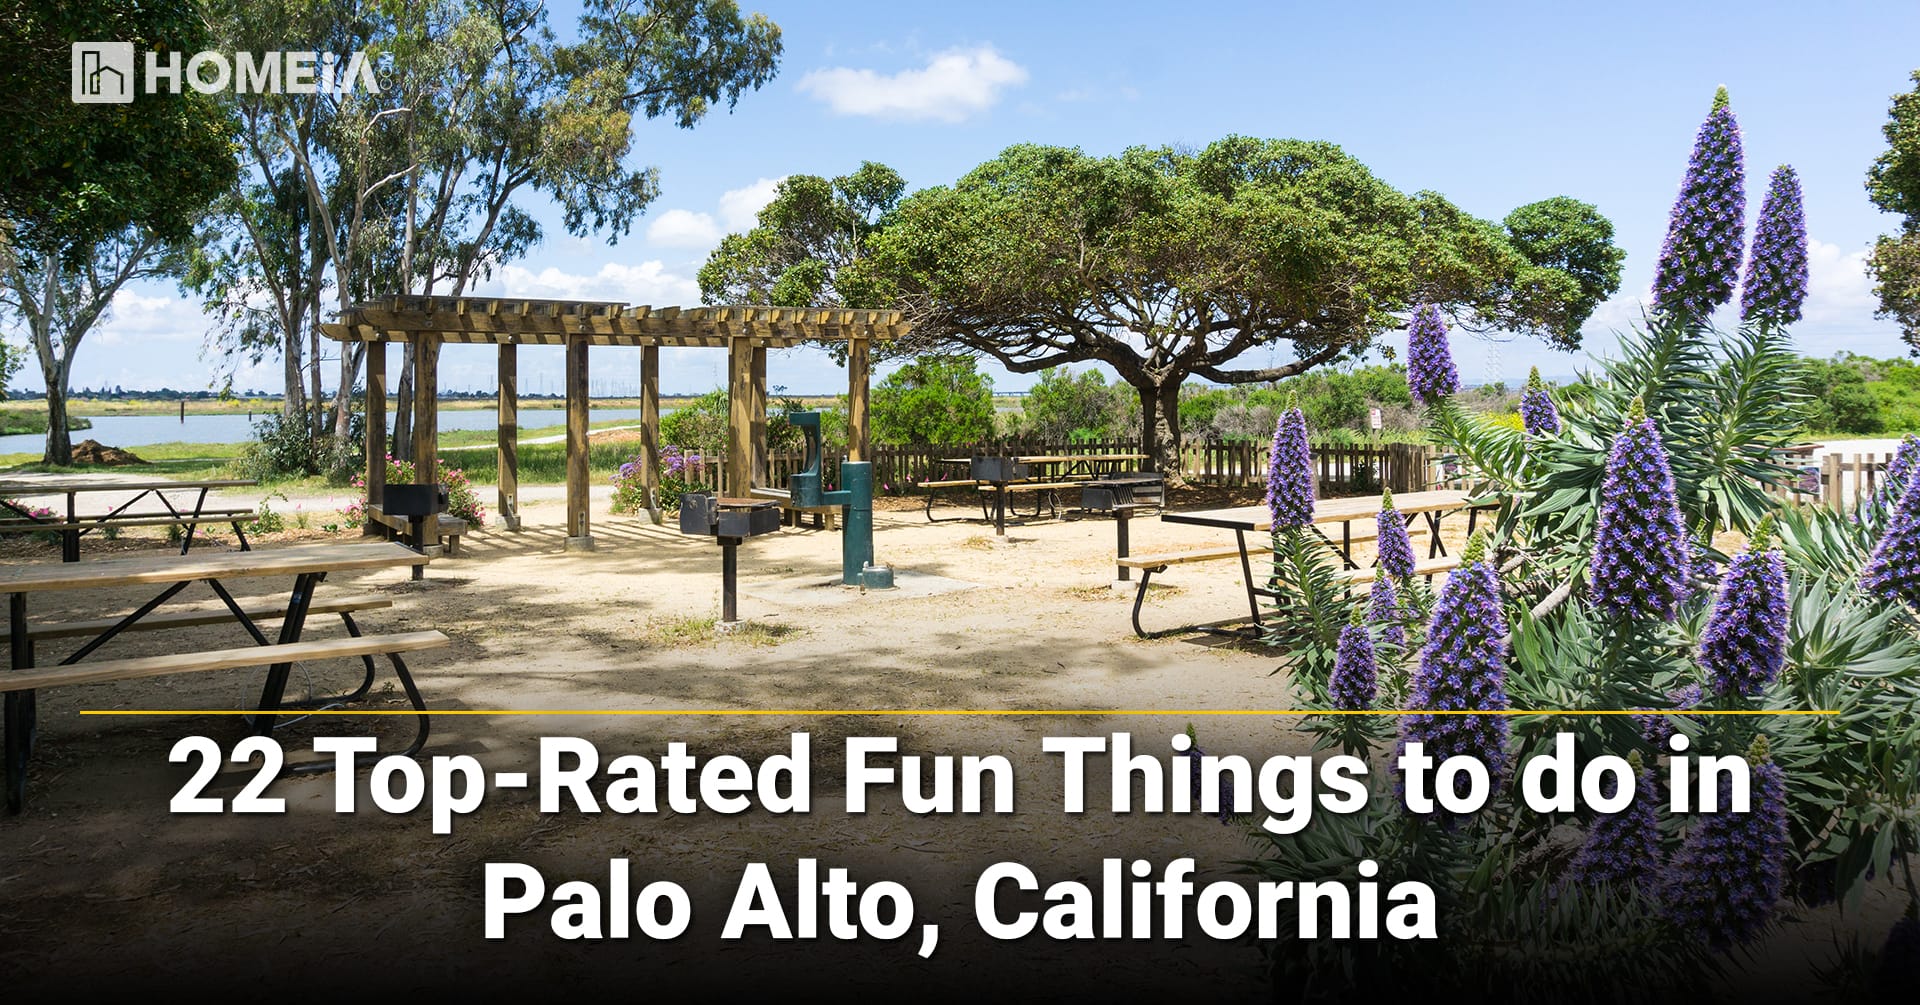 22 Top-Rated Fun Things to do in Palo Alto, California